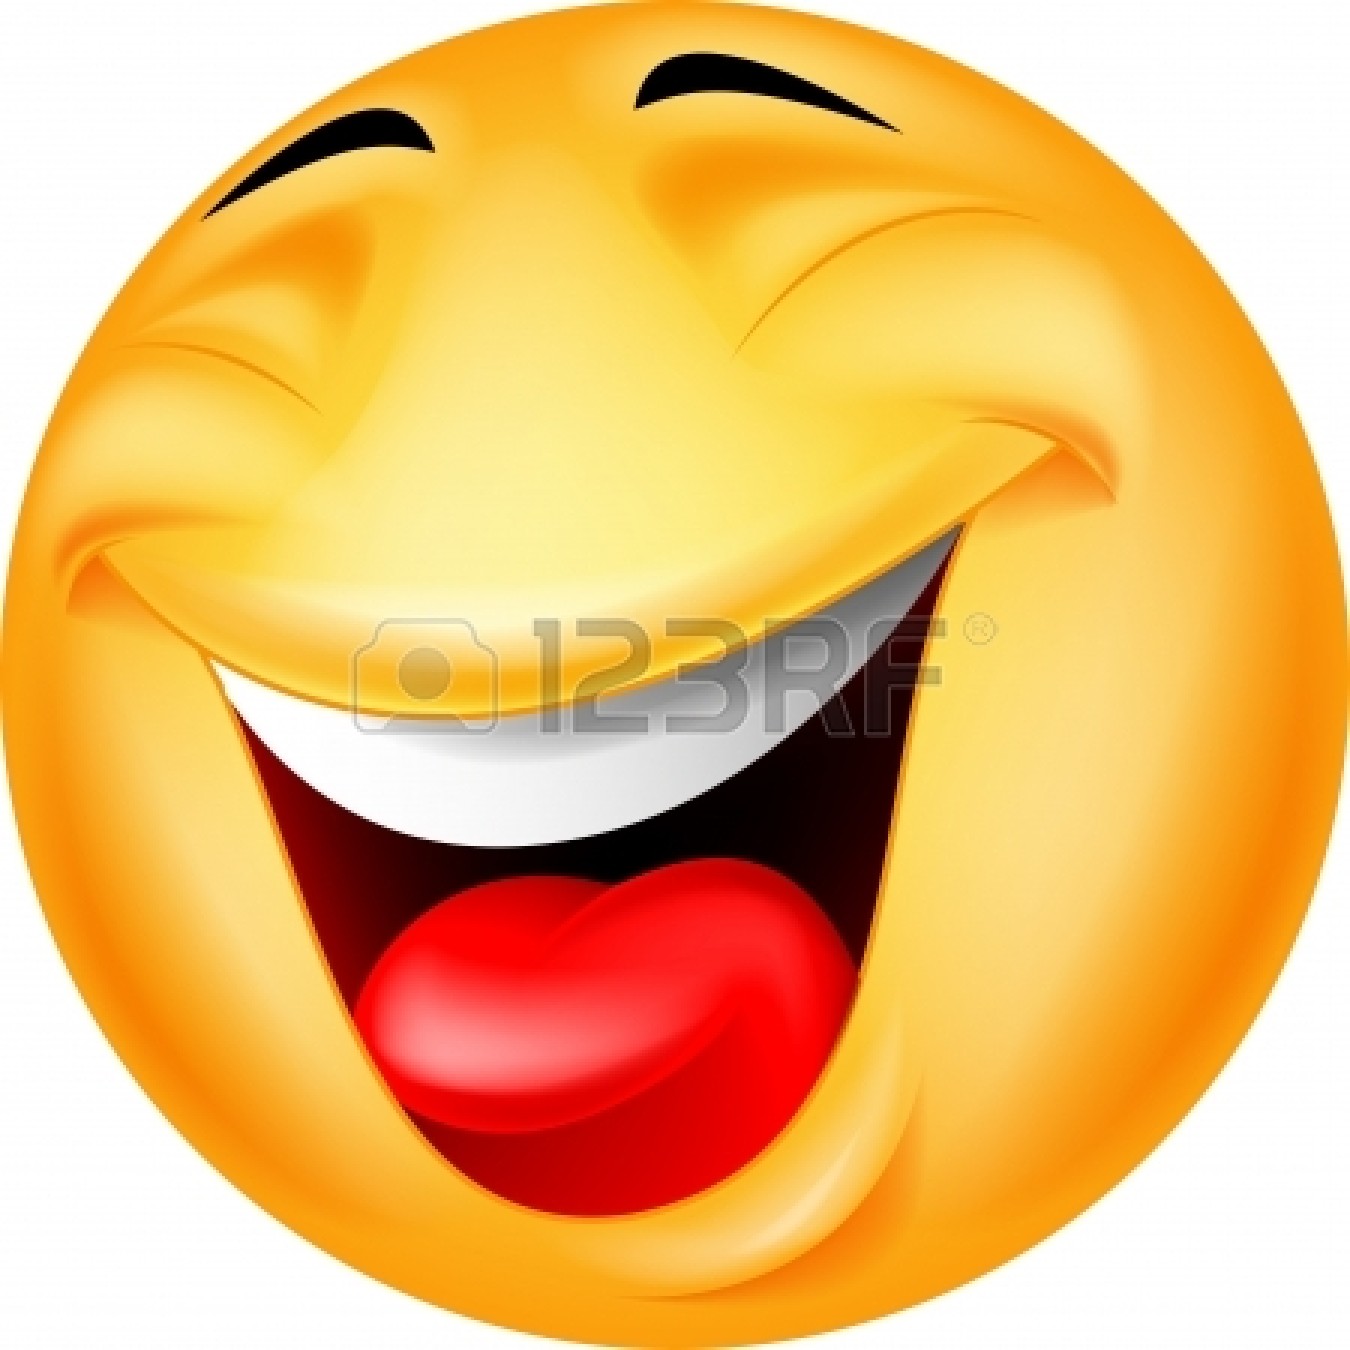 Moving Laughing Smiley Face   Clipart Panda   Free Clipart Images